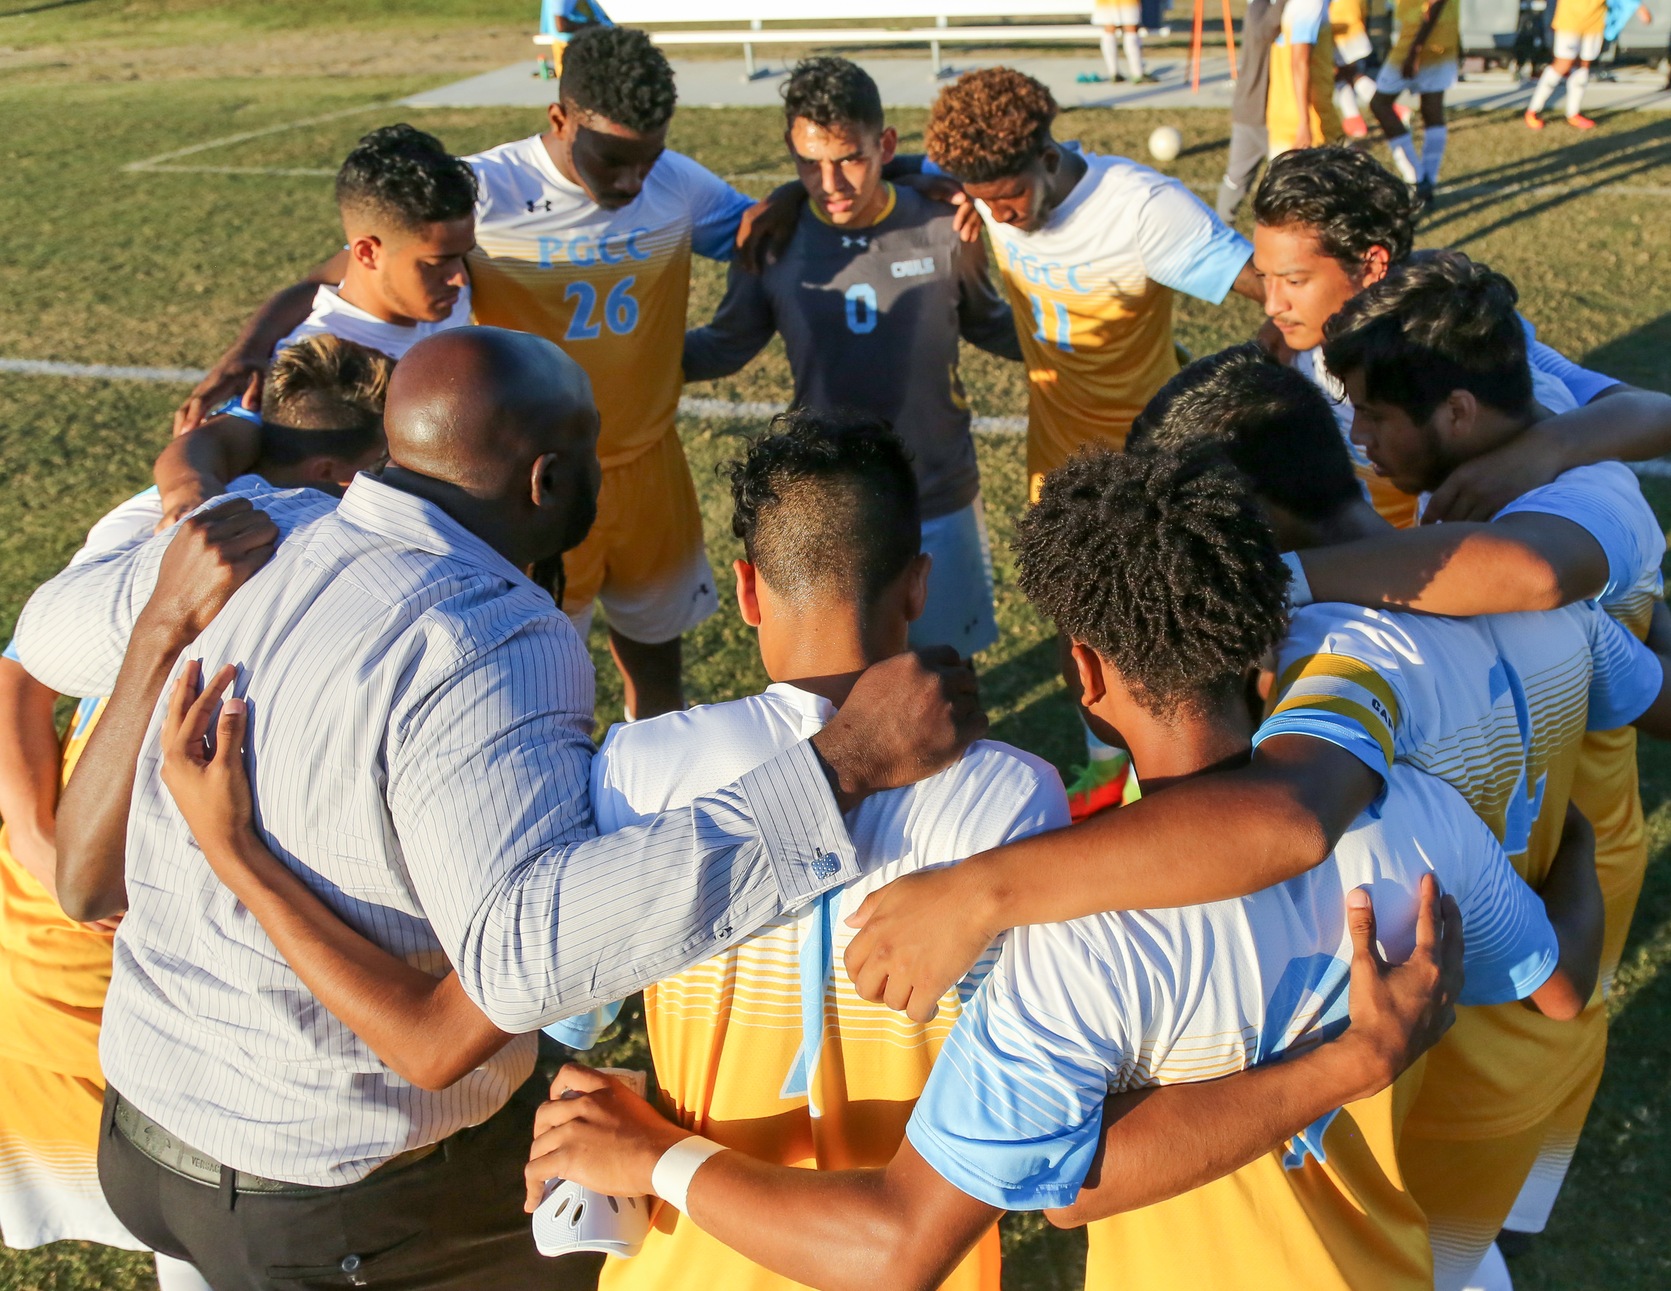 Prince George's Men's Soccer Moves Back To Ninth In NJCAA Division III Men's Soccer Rankings